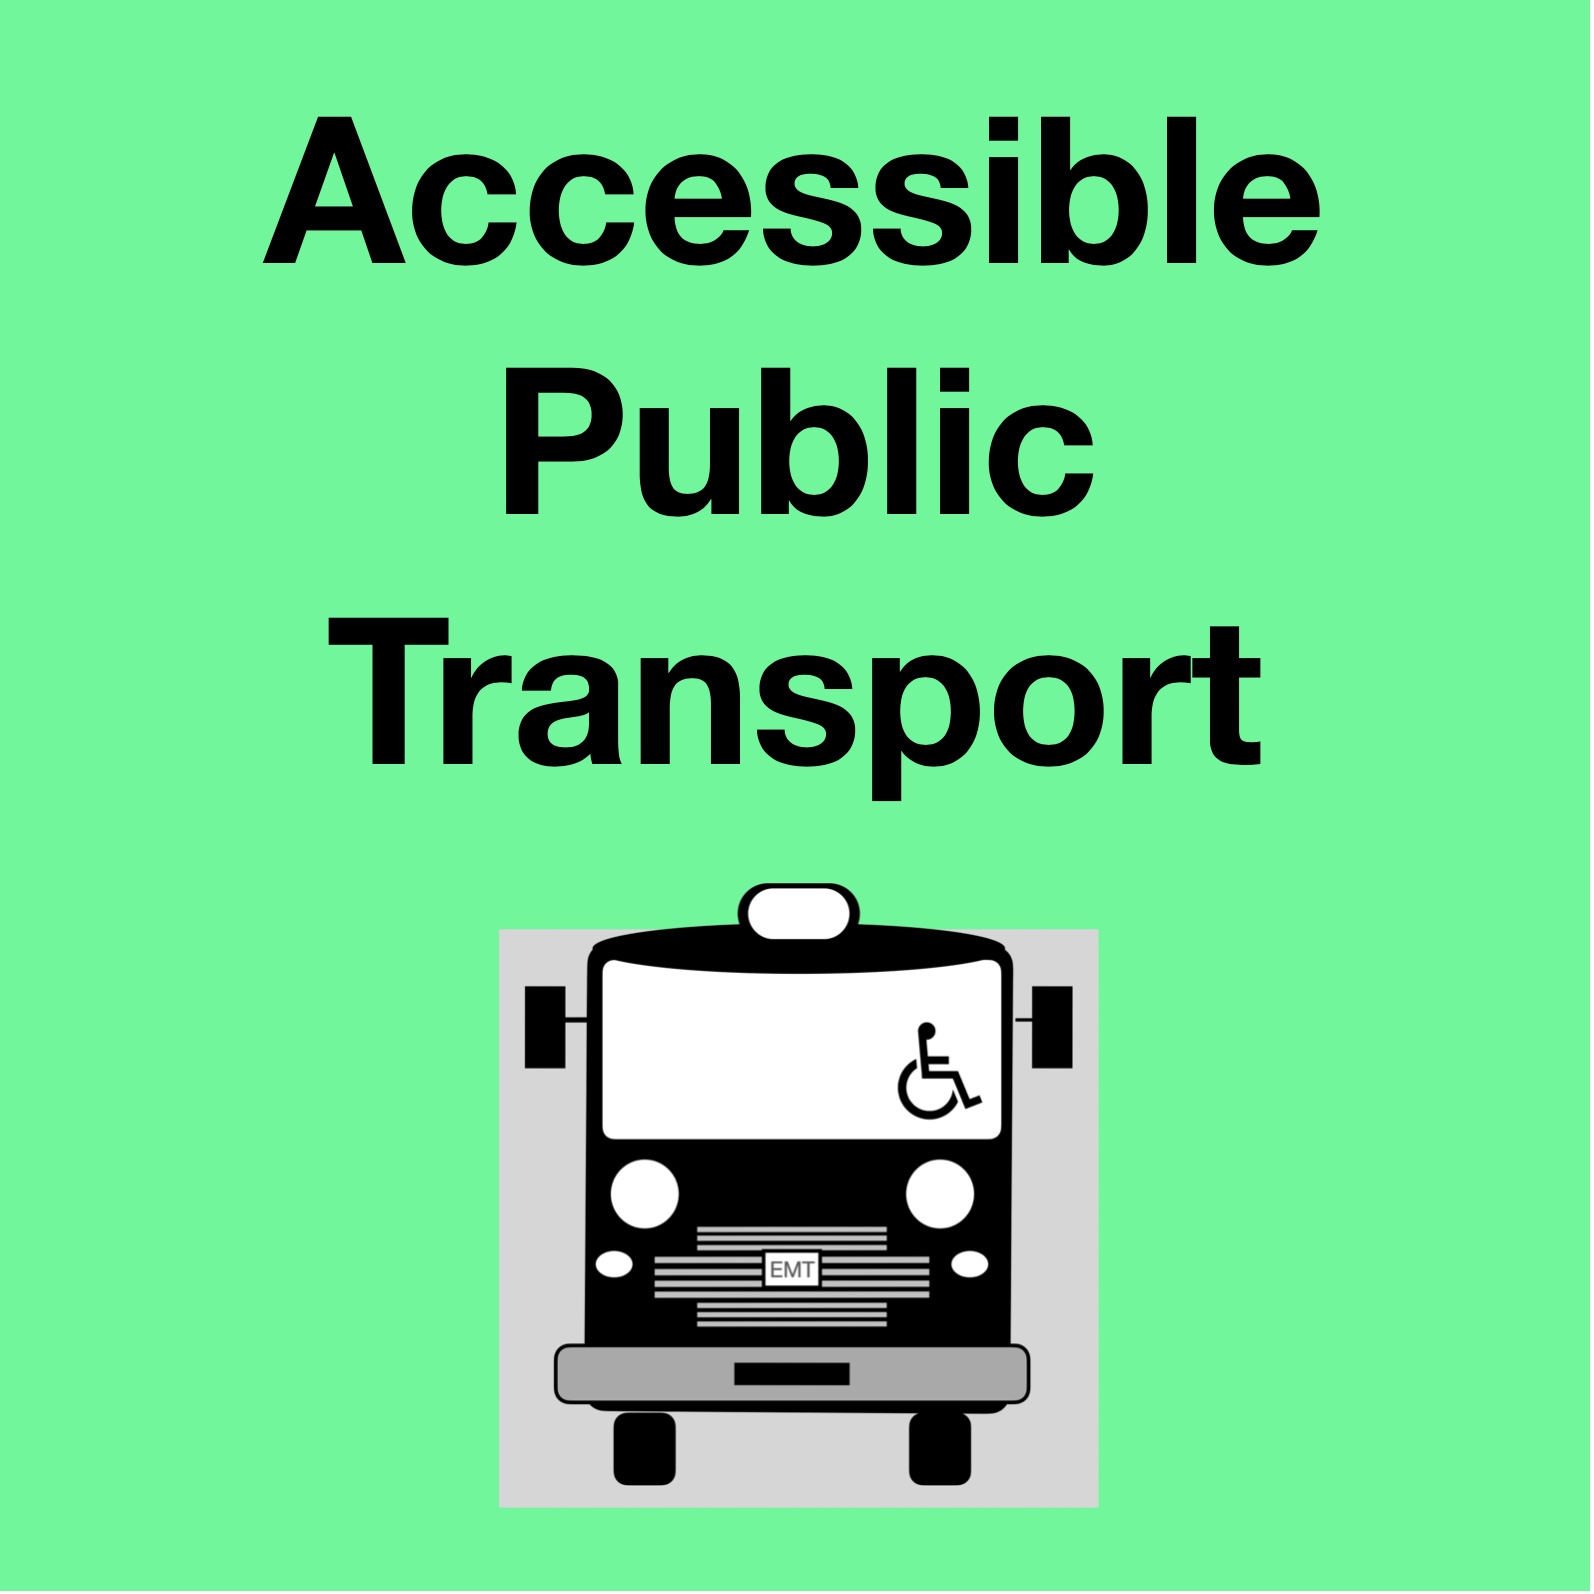 Accessible Public Transport In Hotel